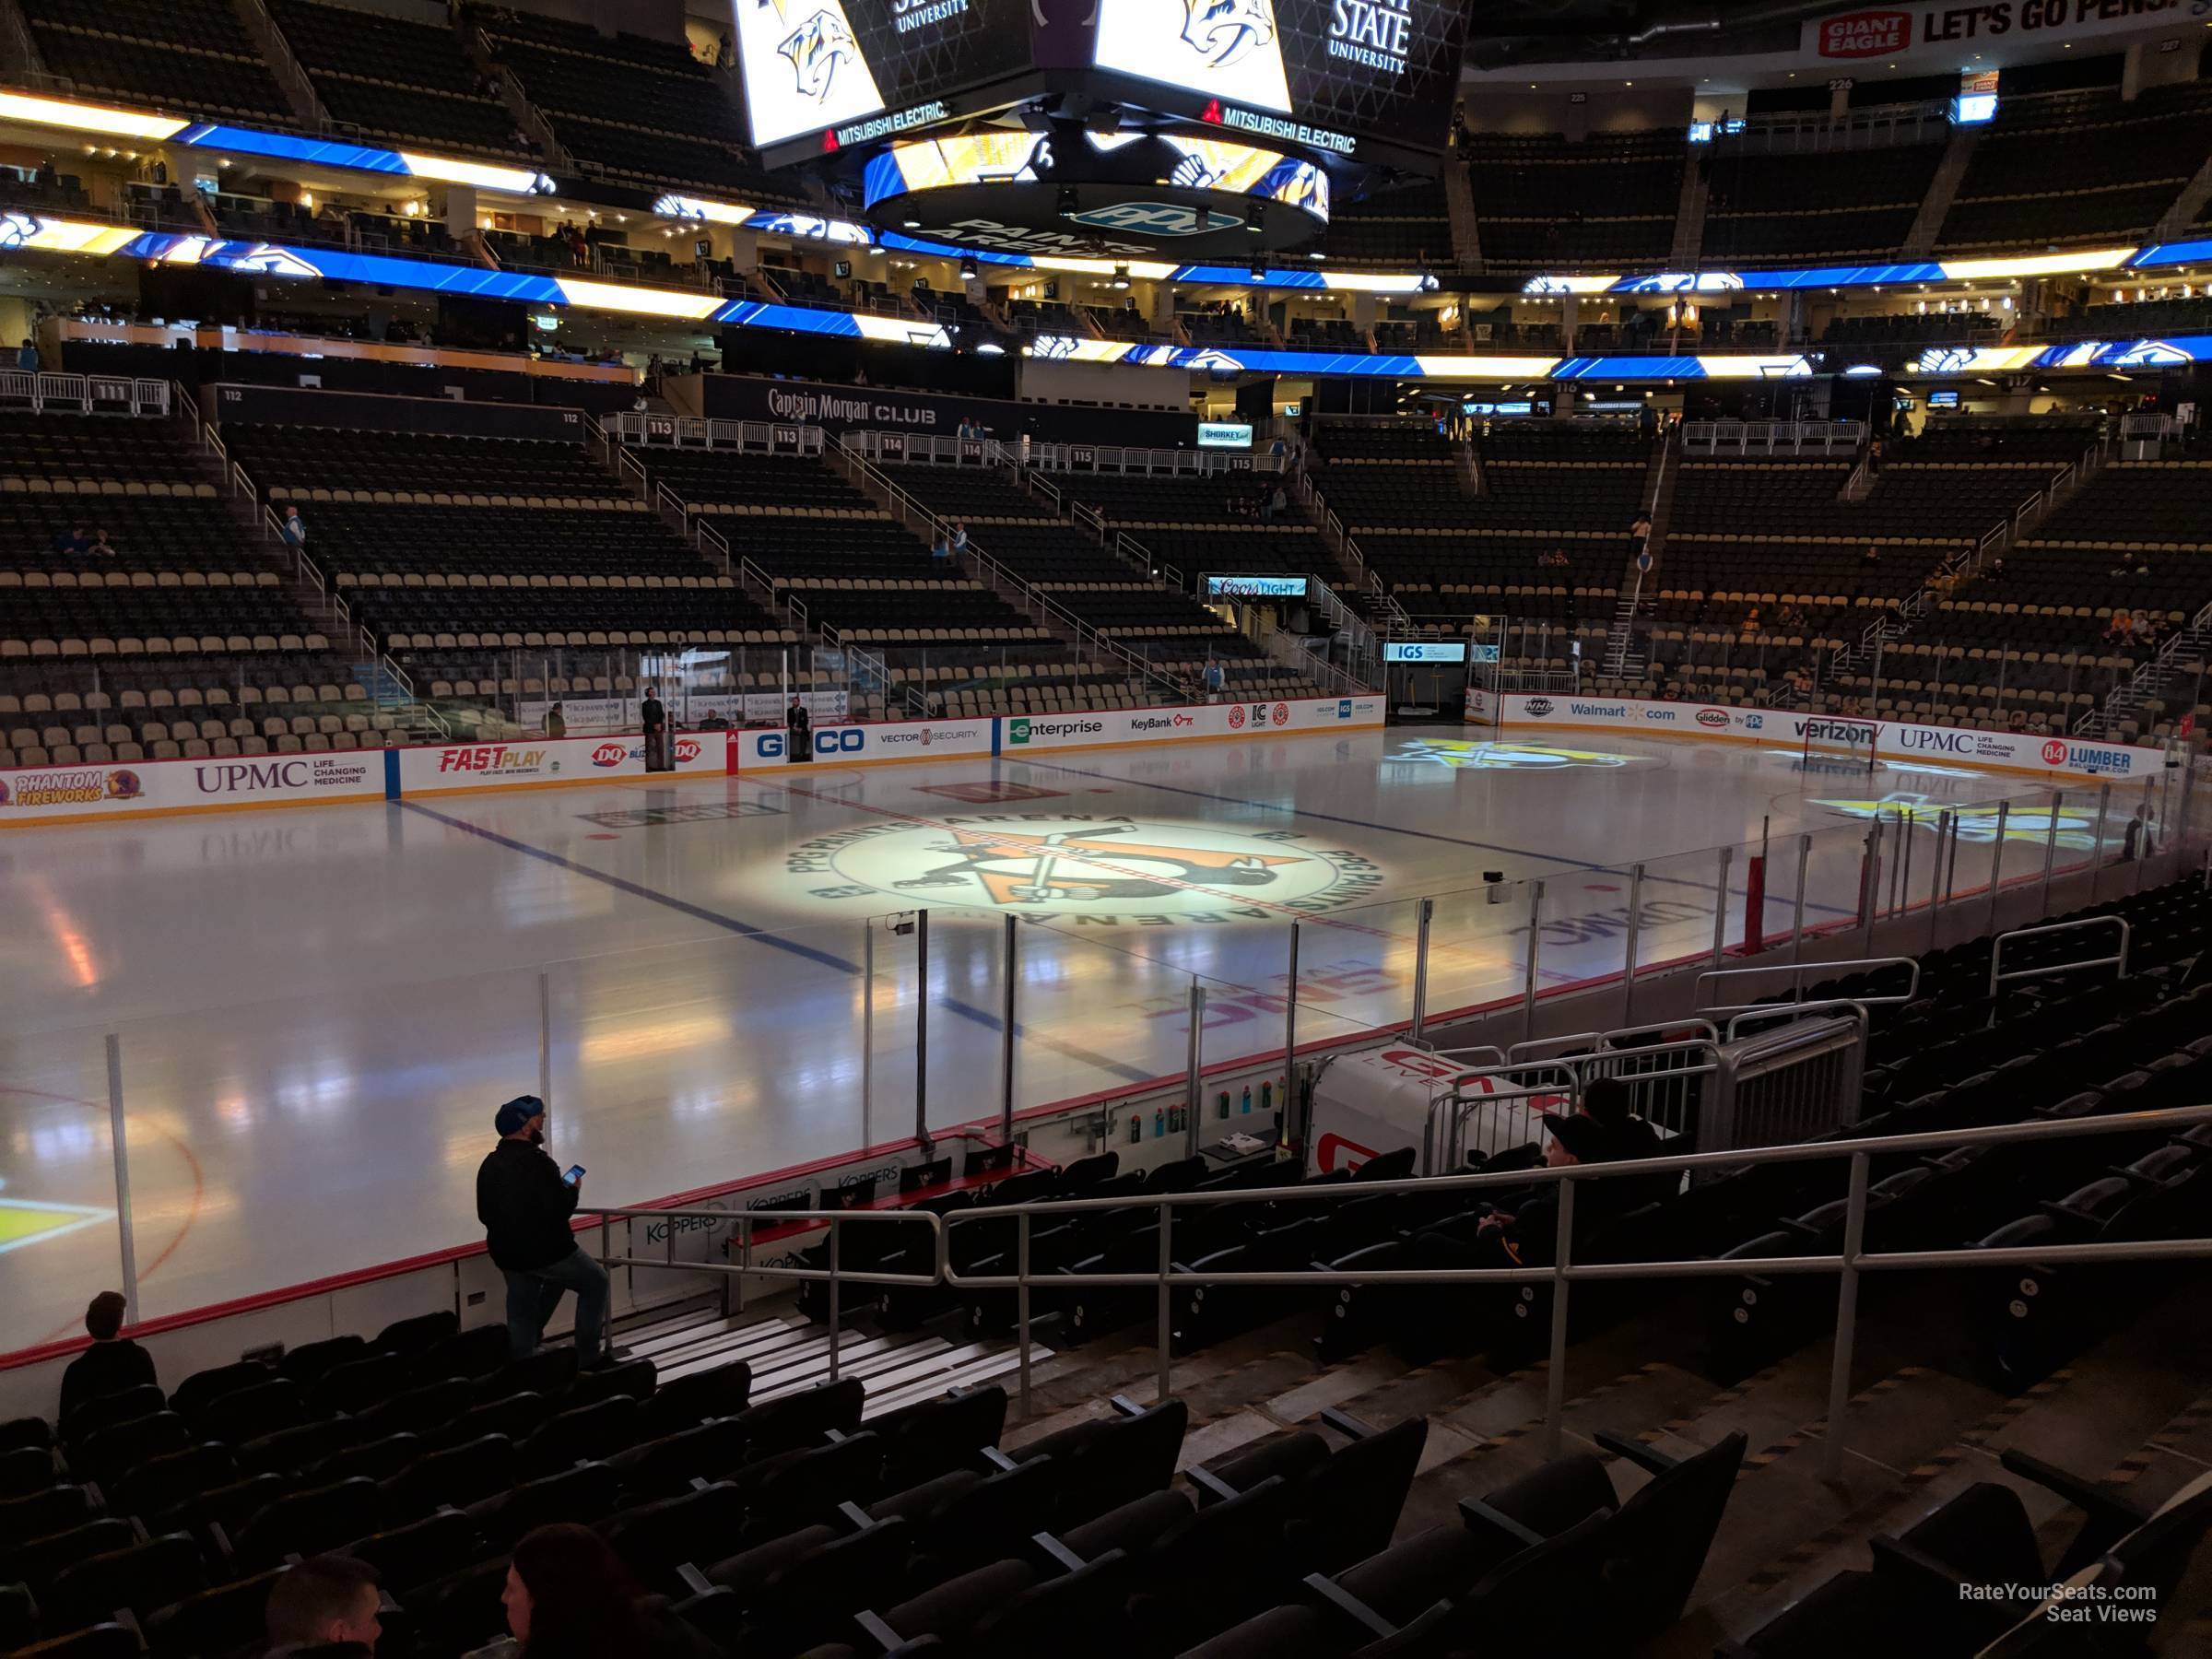 Section 234 at PPG Paints Arena 